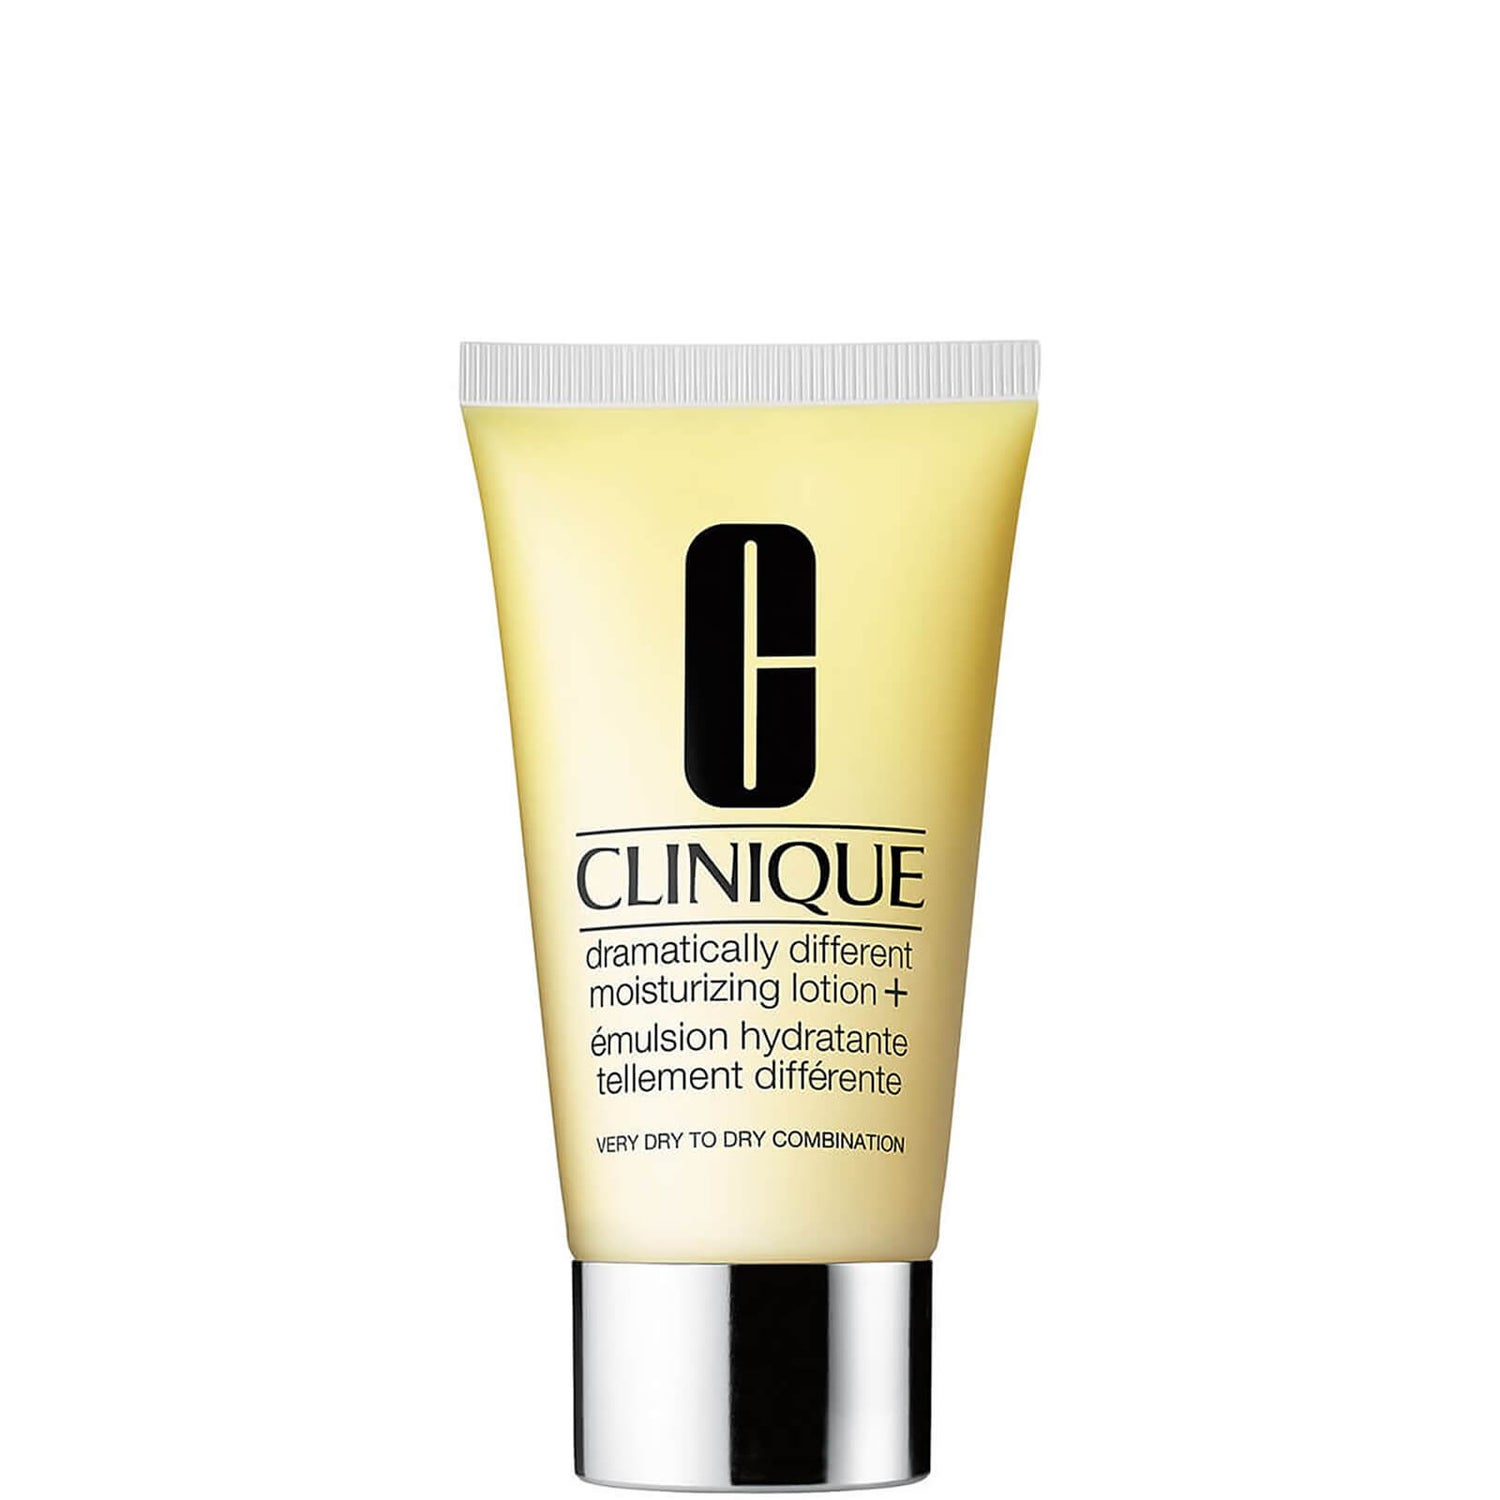 Clinique Dramatically Different Moisturizing Lotion+ 50 ml tube